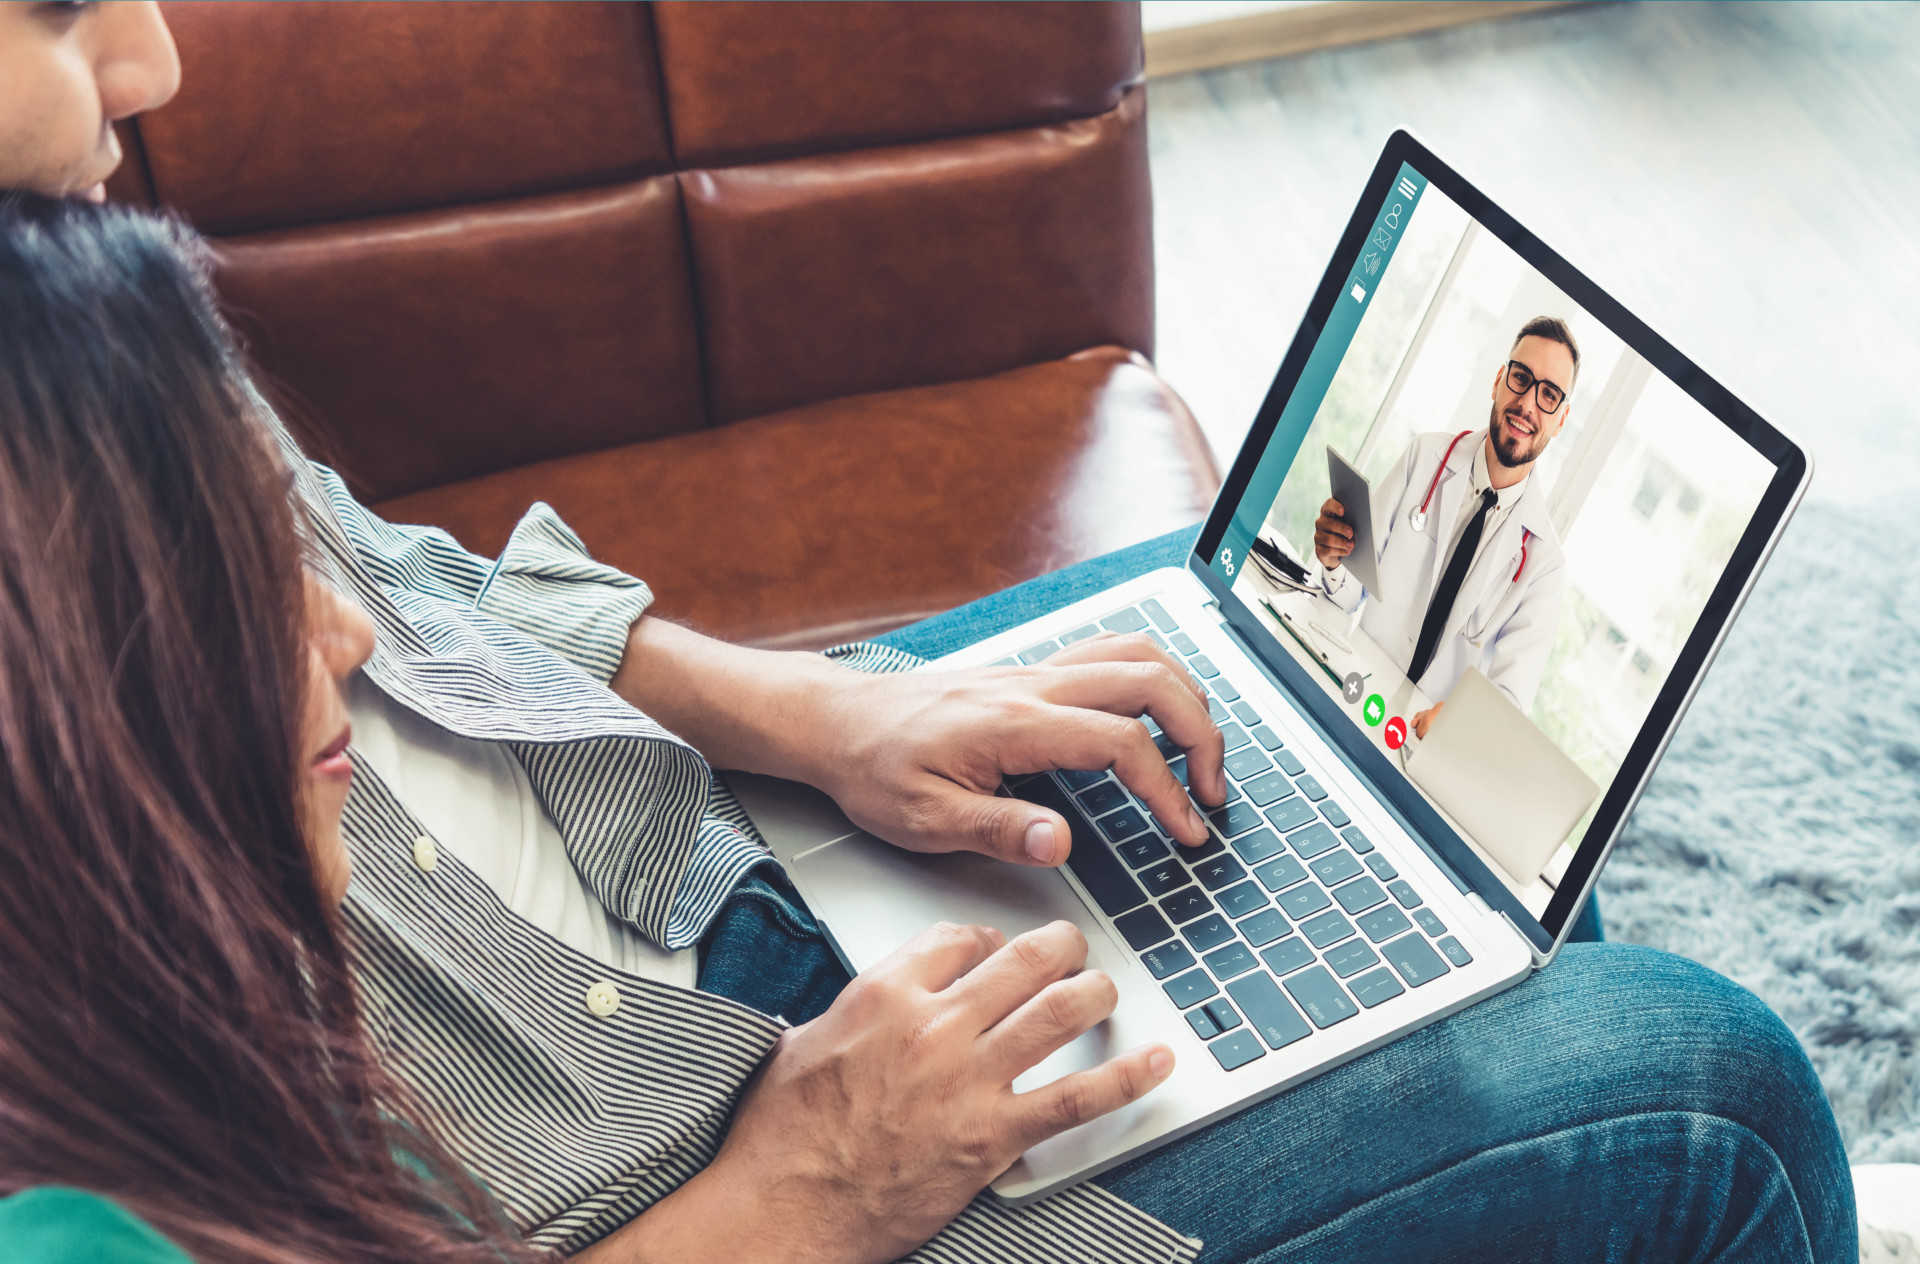 Doctor telemedicine service online video for virtual patient health medical chat